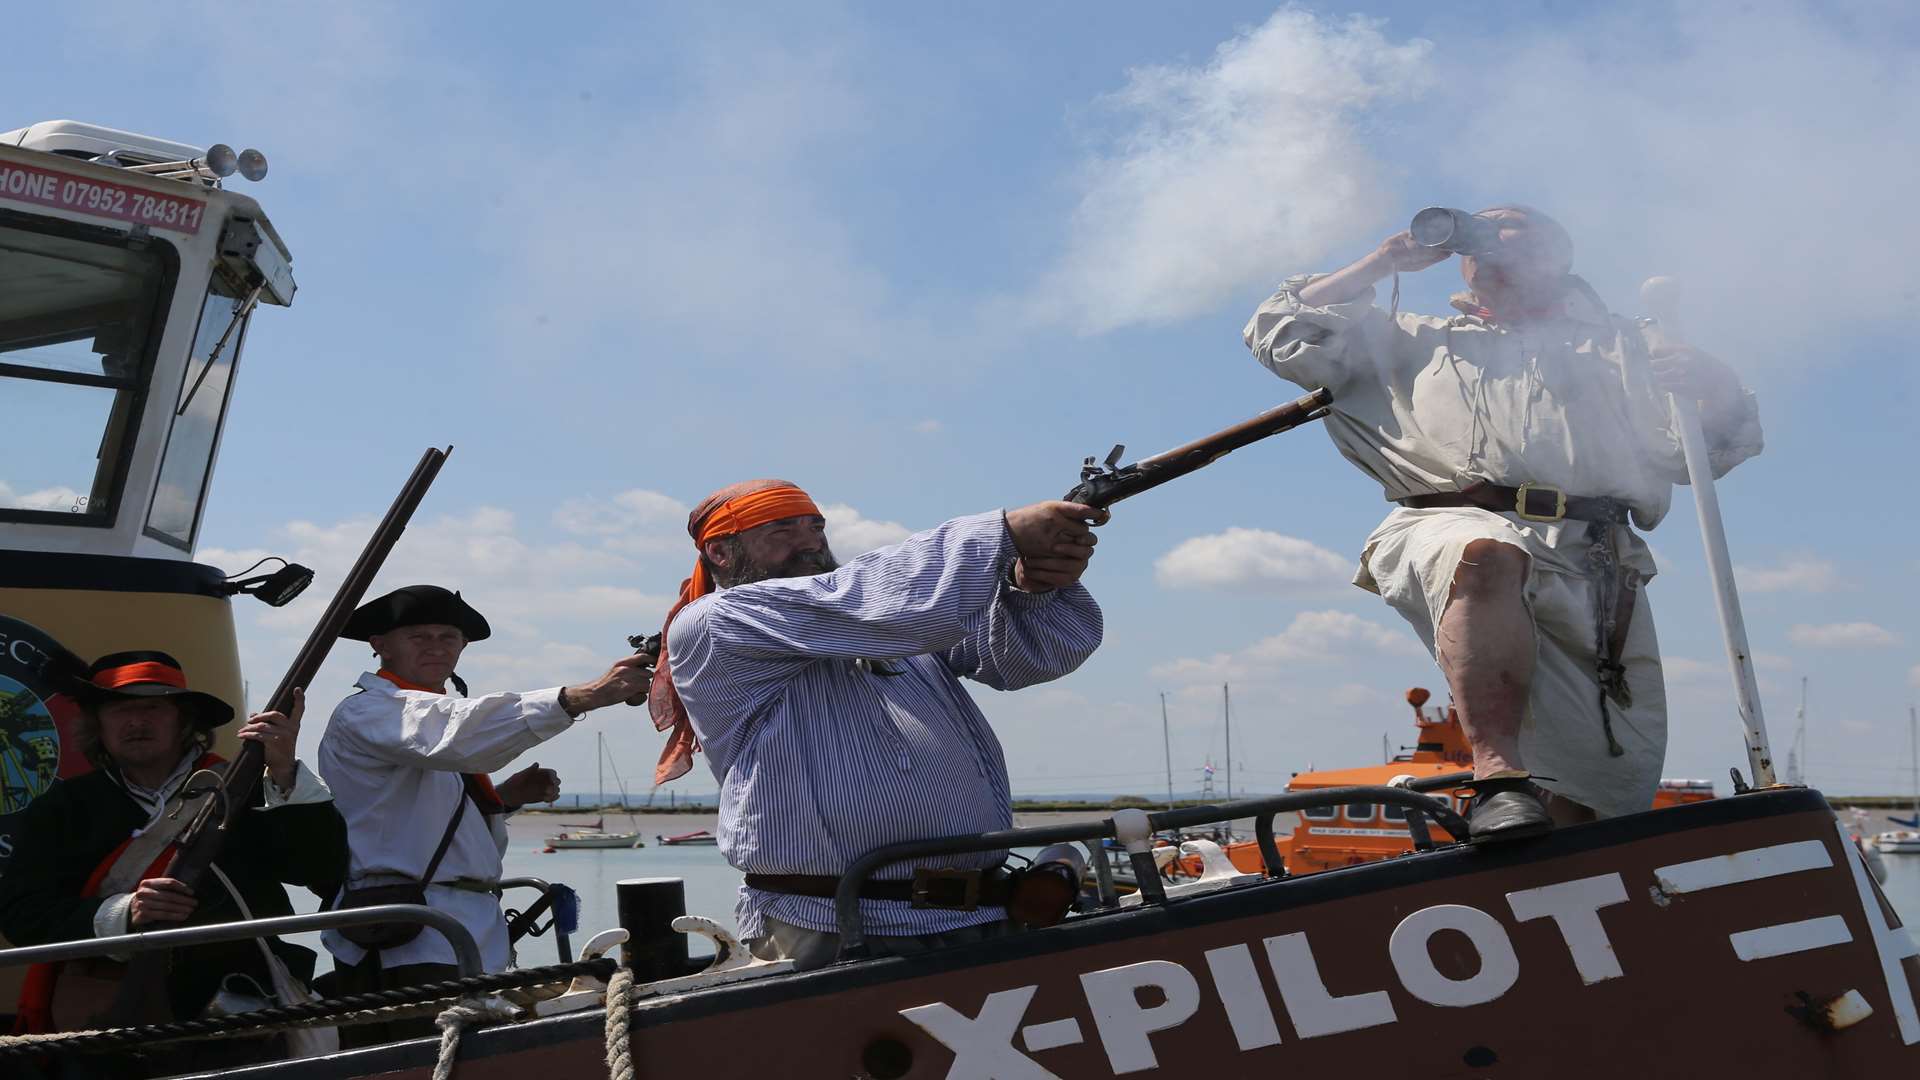 Sheppey Pirates made a bang at the Queenborough Independence Day celebrations.